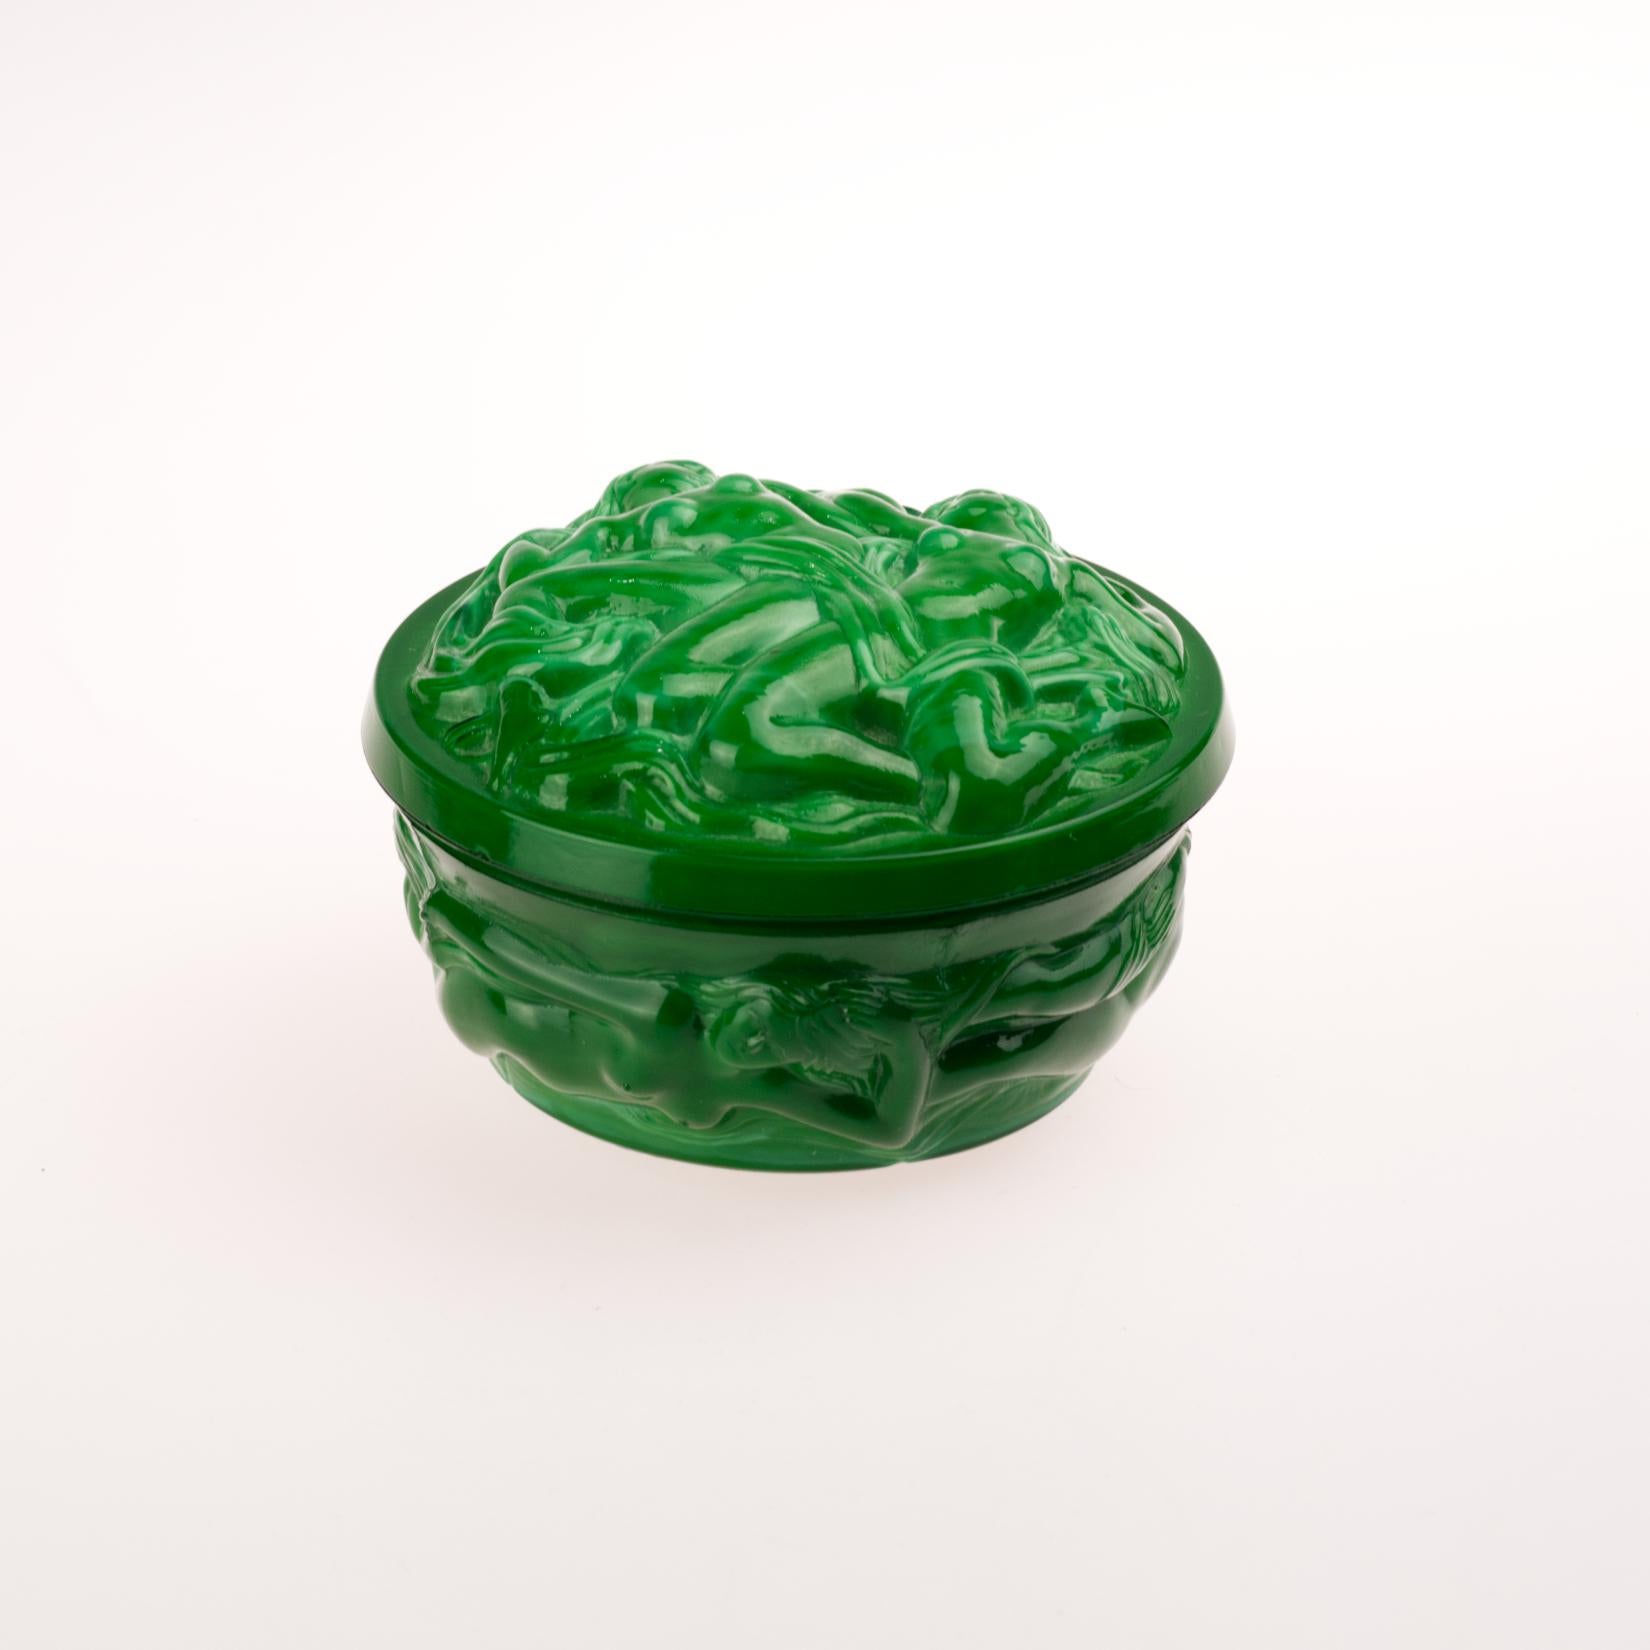 Fantastic example of a I. Heinrich Hoffmann Czech Art Deco malachite glass high relief reclining nude trinket box. It's done in beautiful green Czechoslovakian malachite glass with nudes on the sides and the cover this exquisite jewelry box is a